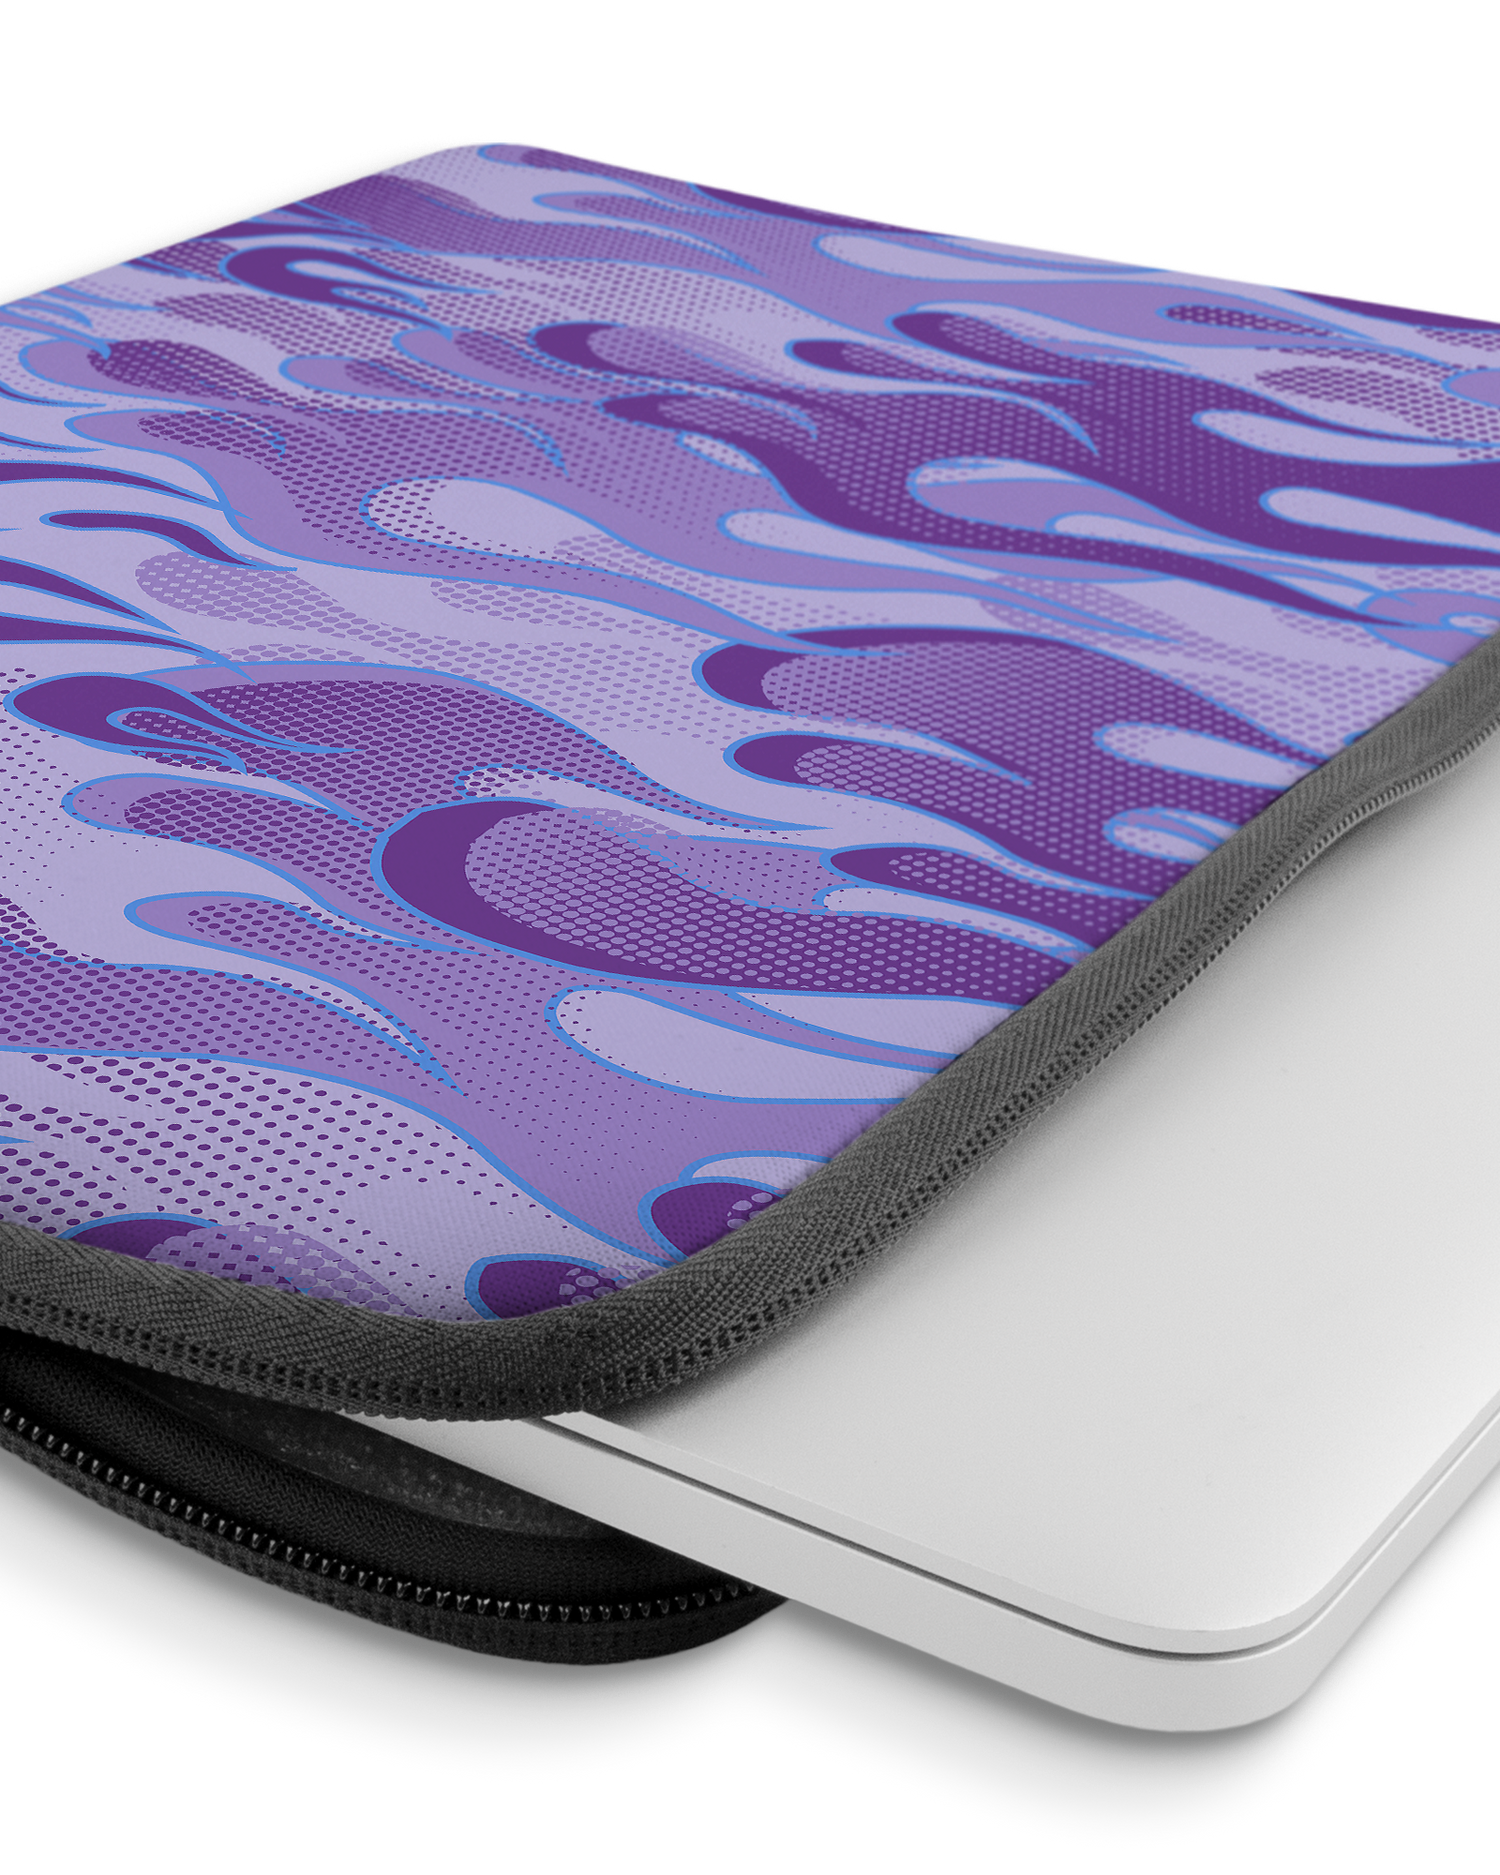 Purple Flames Laptop Case 14 inch with device inside